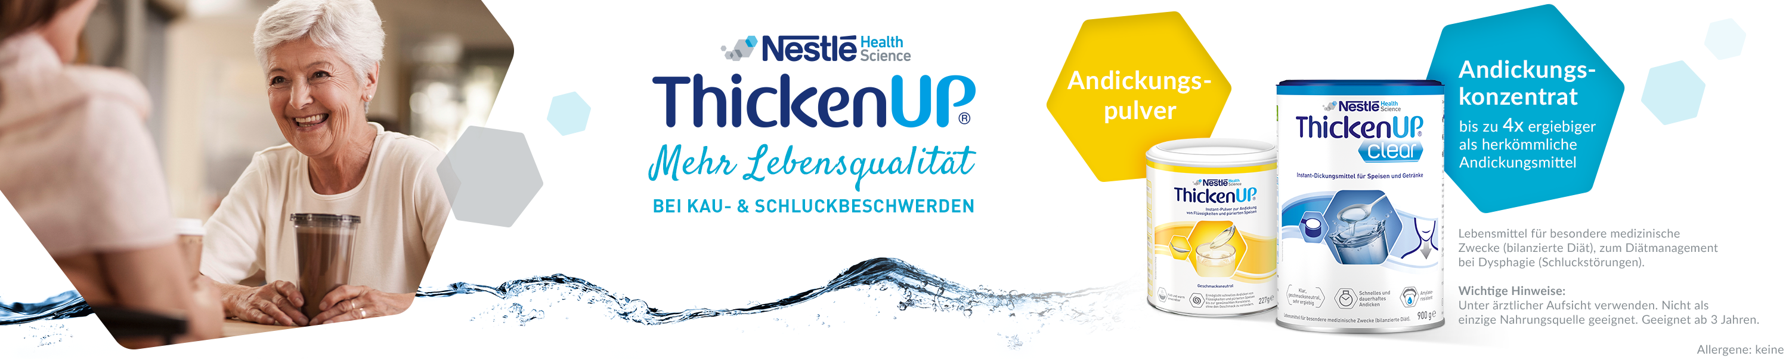 ThickenUp banner